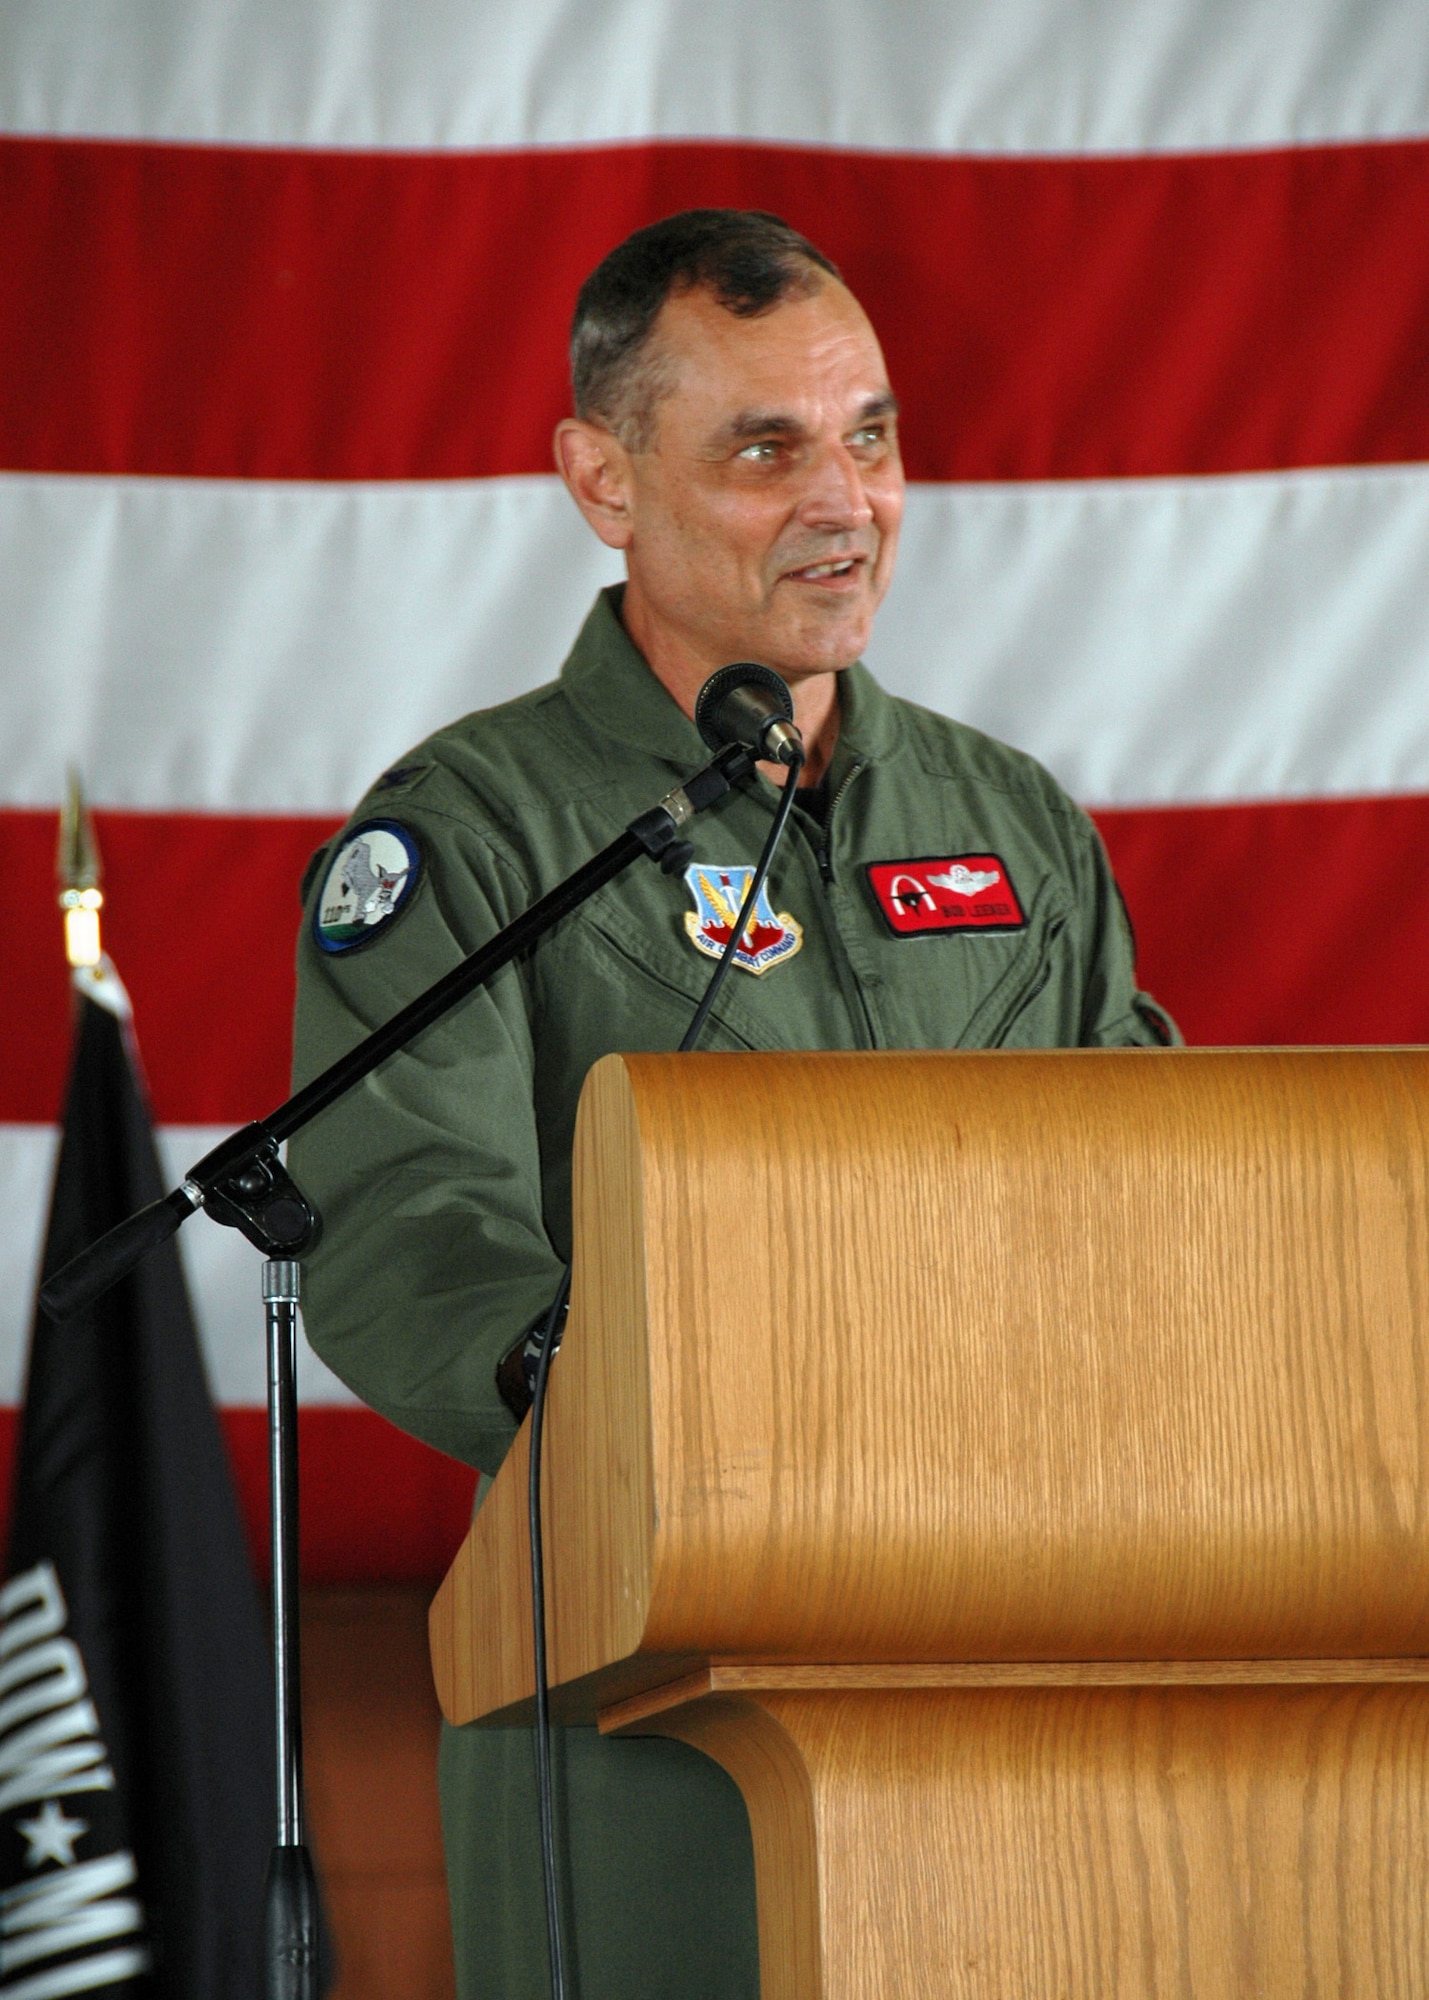 END OF AN ERA.  Colonel Robert Leeker, 131st Fighter Wing Commander, spoke at the 131st Fighter Wing End of Era Ceremony, at the Missouri Air National Guard Base-Lambert Field, June 13, 2009.  "Today we are merely turning a page in our history book.  The 131st (Fighter Wing) and the 110th (Fighter Squadron) lives on," said Leeker.  The ceremony commemorated the culmination of 86 years of flying operations in Saint Louis.  (U.S. Air Force Photo by Senior Airman Amber Hodges.  RELEASED)